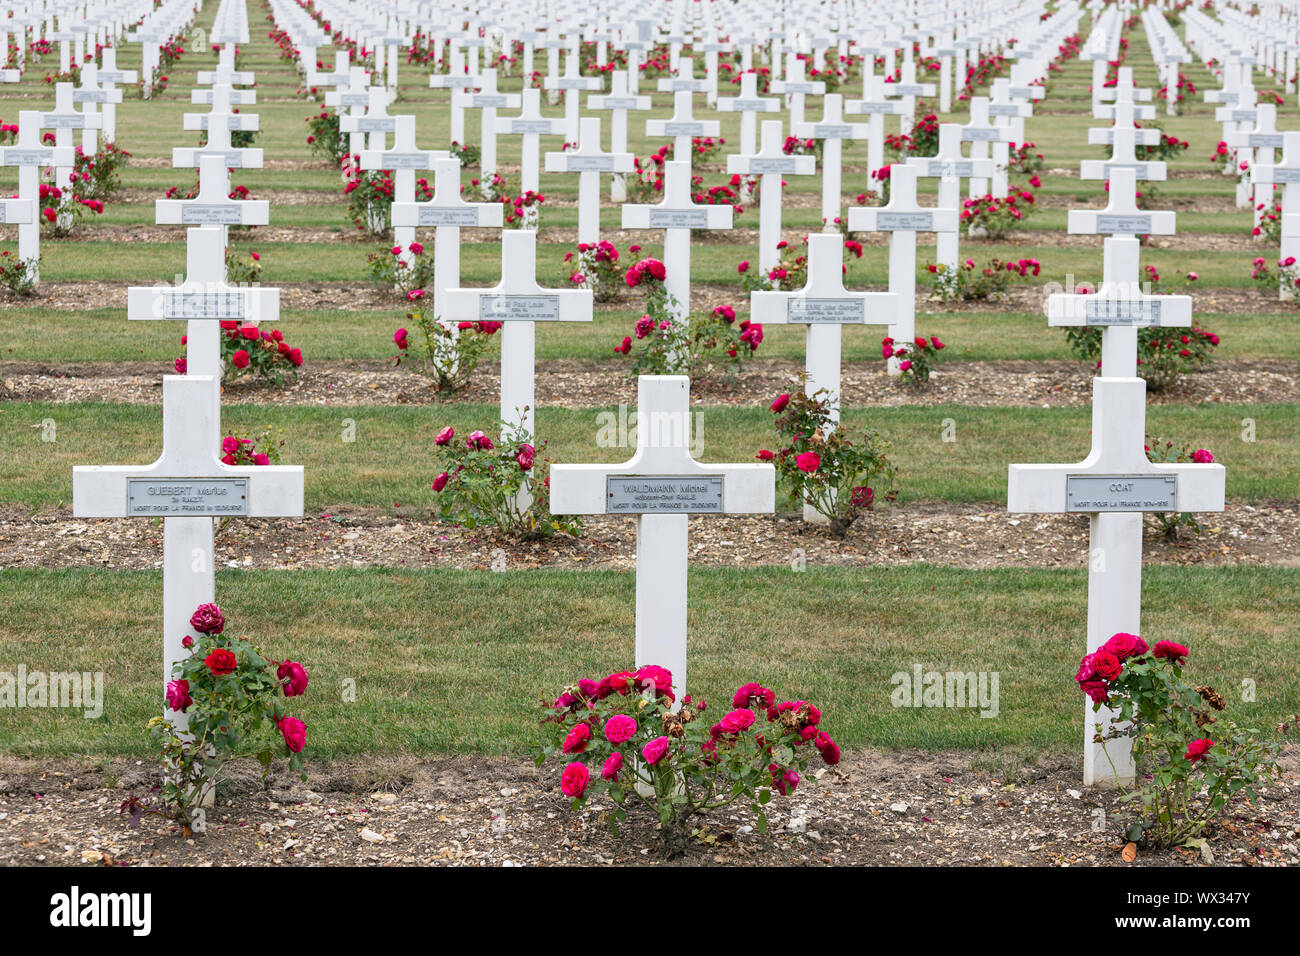 Cemetery First World War soldiers died at Battle of Verdun, France Stock Photo